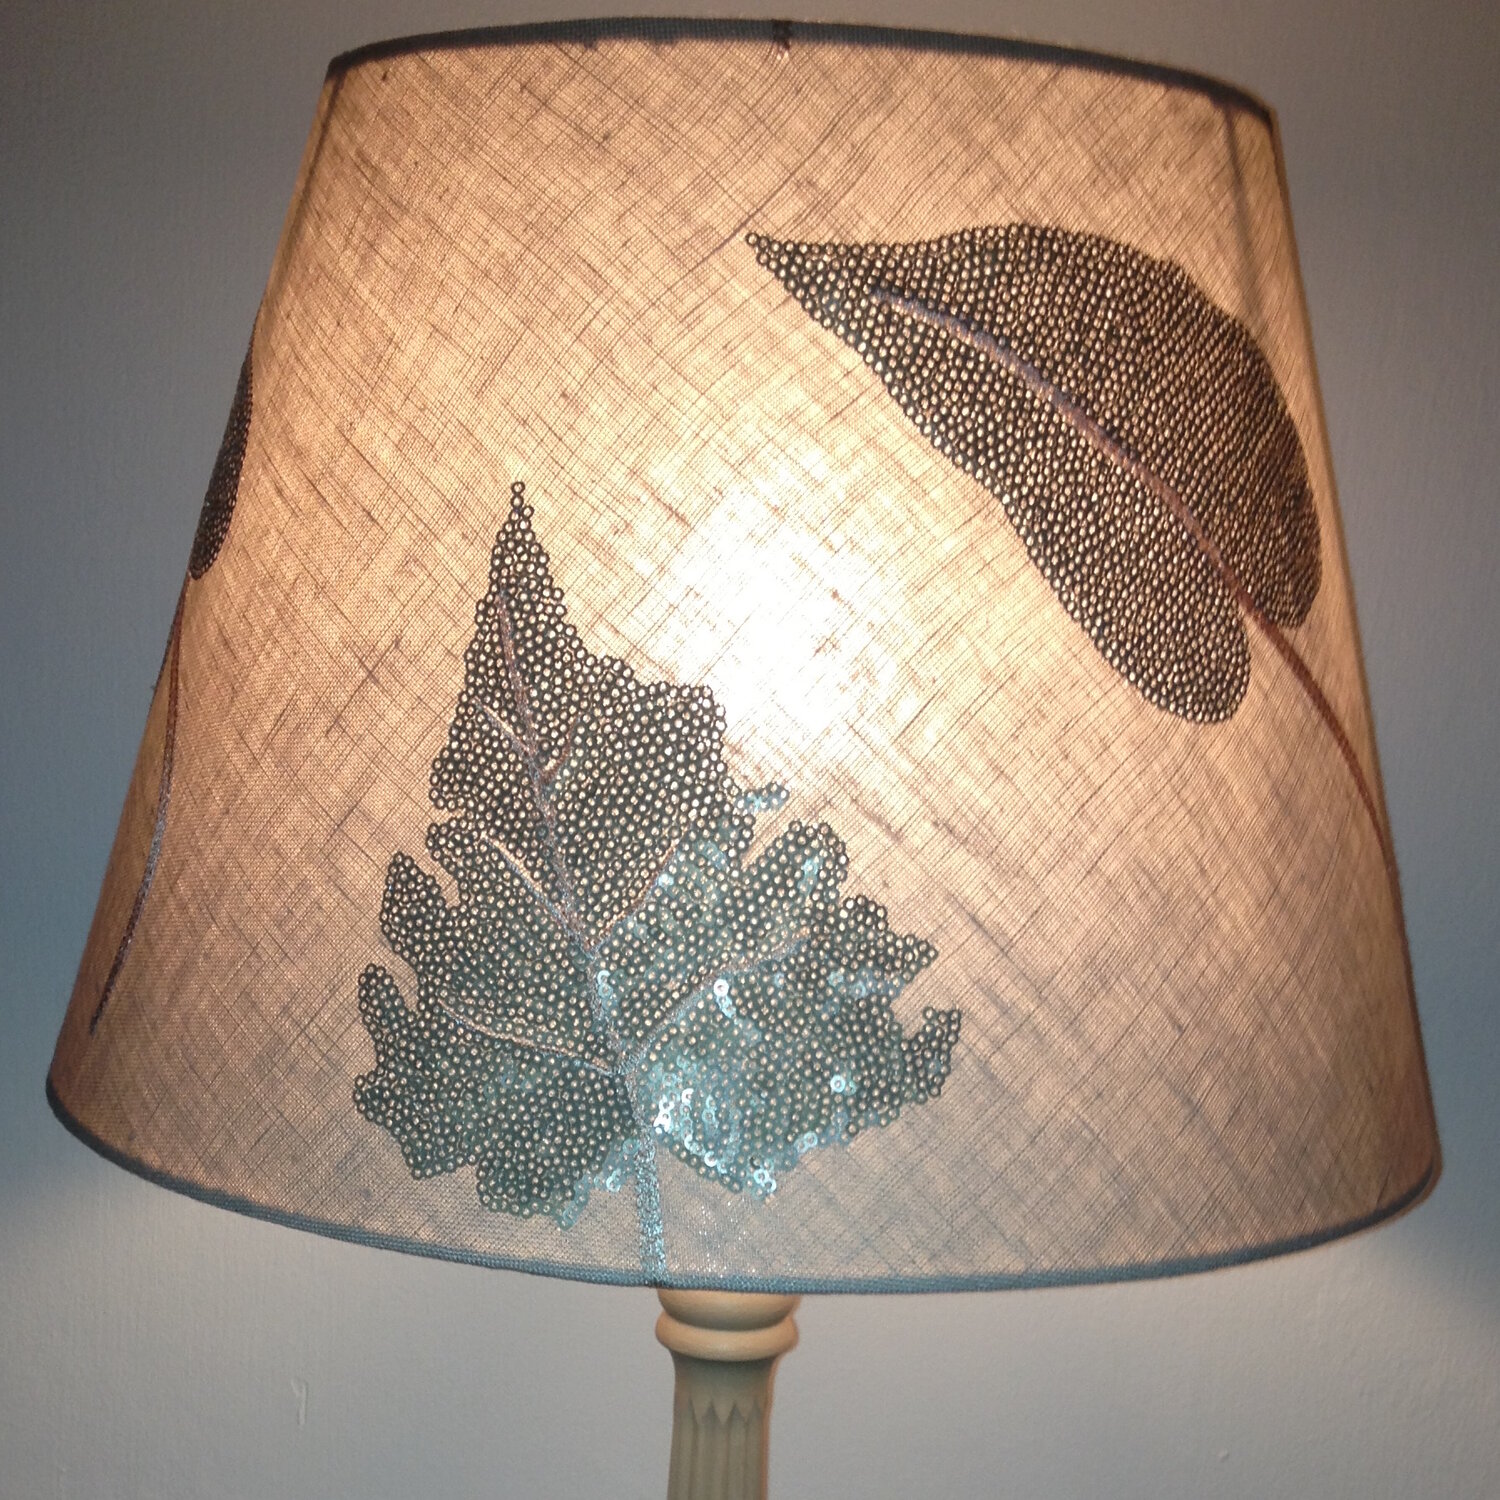 Lamp Shade Coverings Feature, What Type Of Fabric To Cover Lampshade